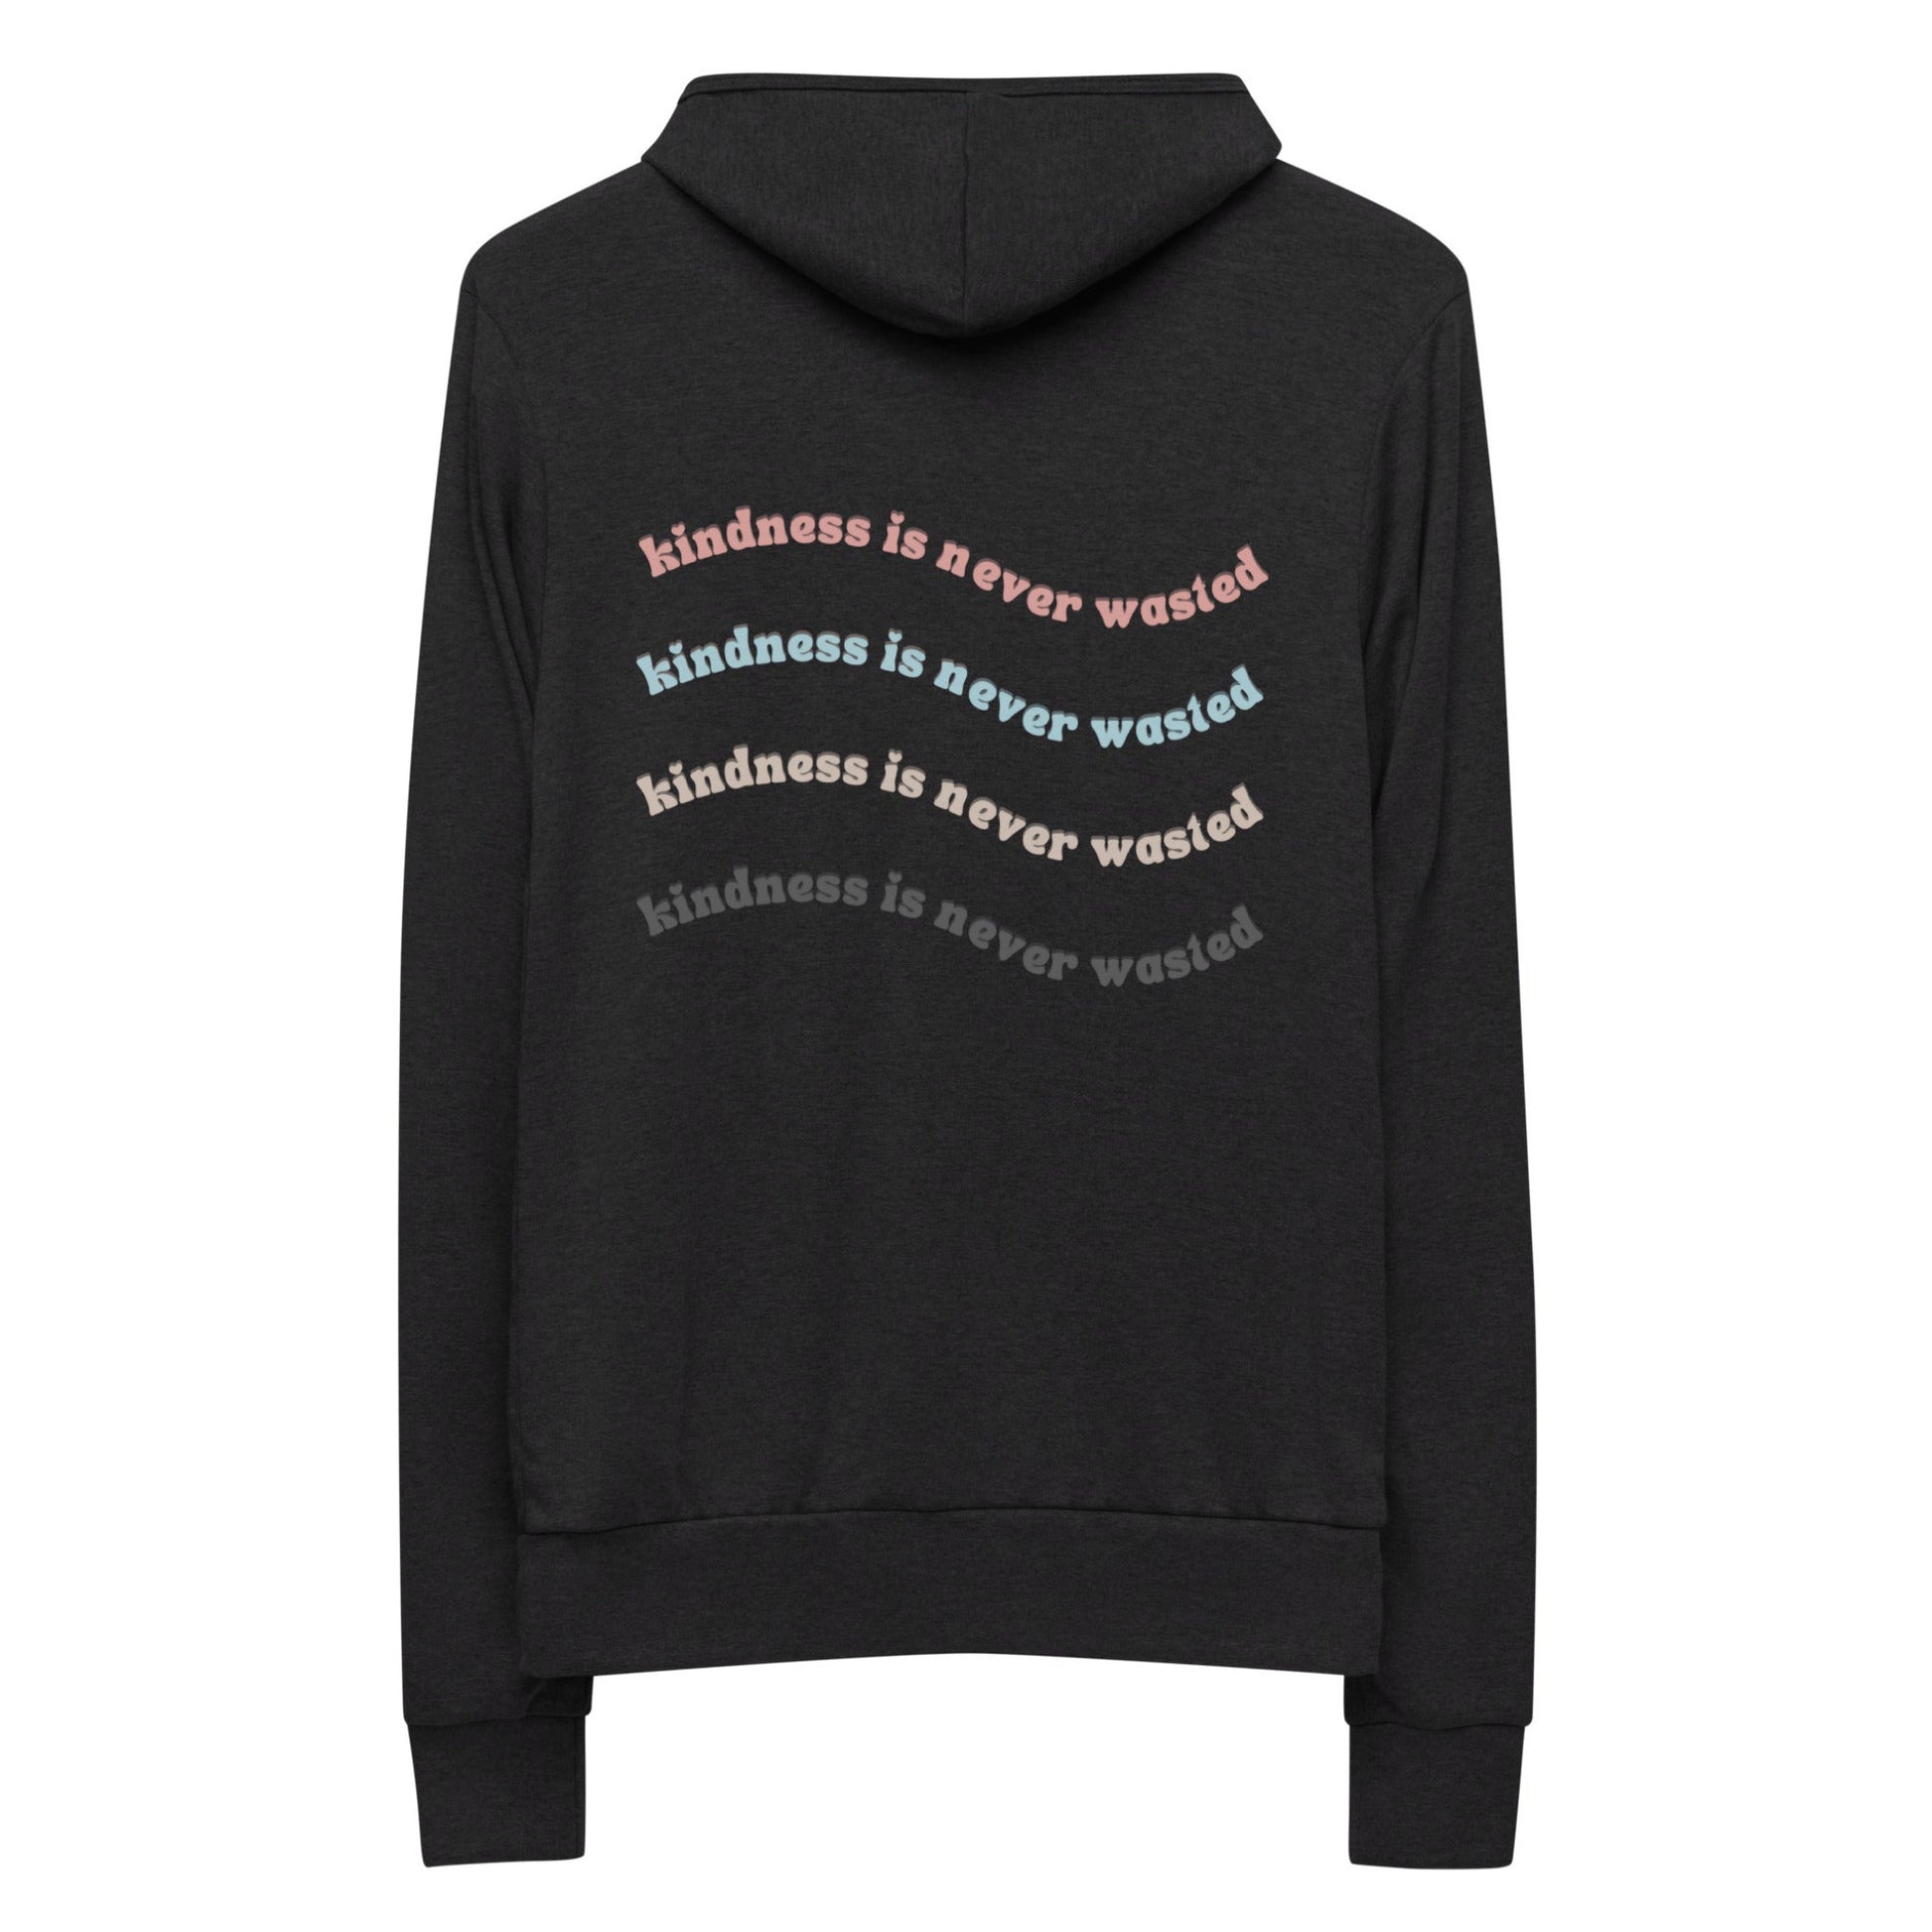 Black unisex "kidness if never wasted" hoodie with print in pink, blue, yellow, and grey. 